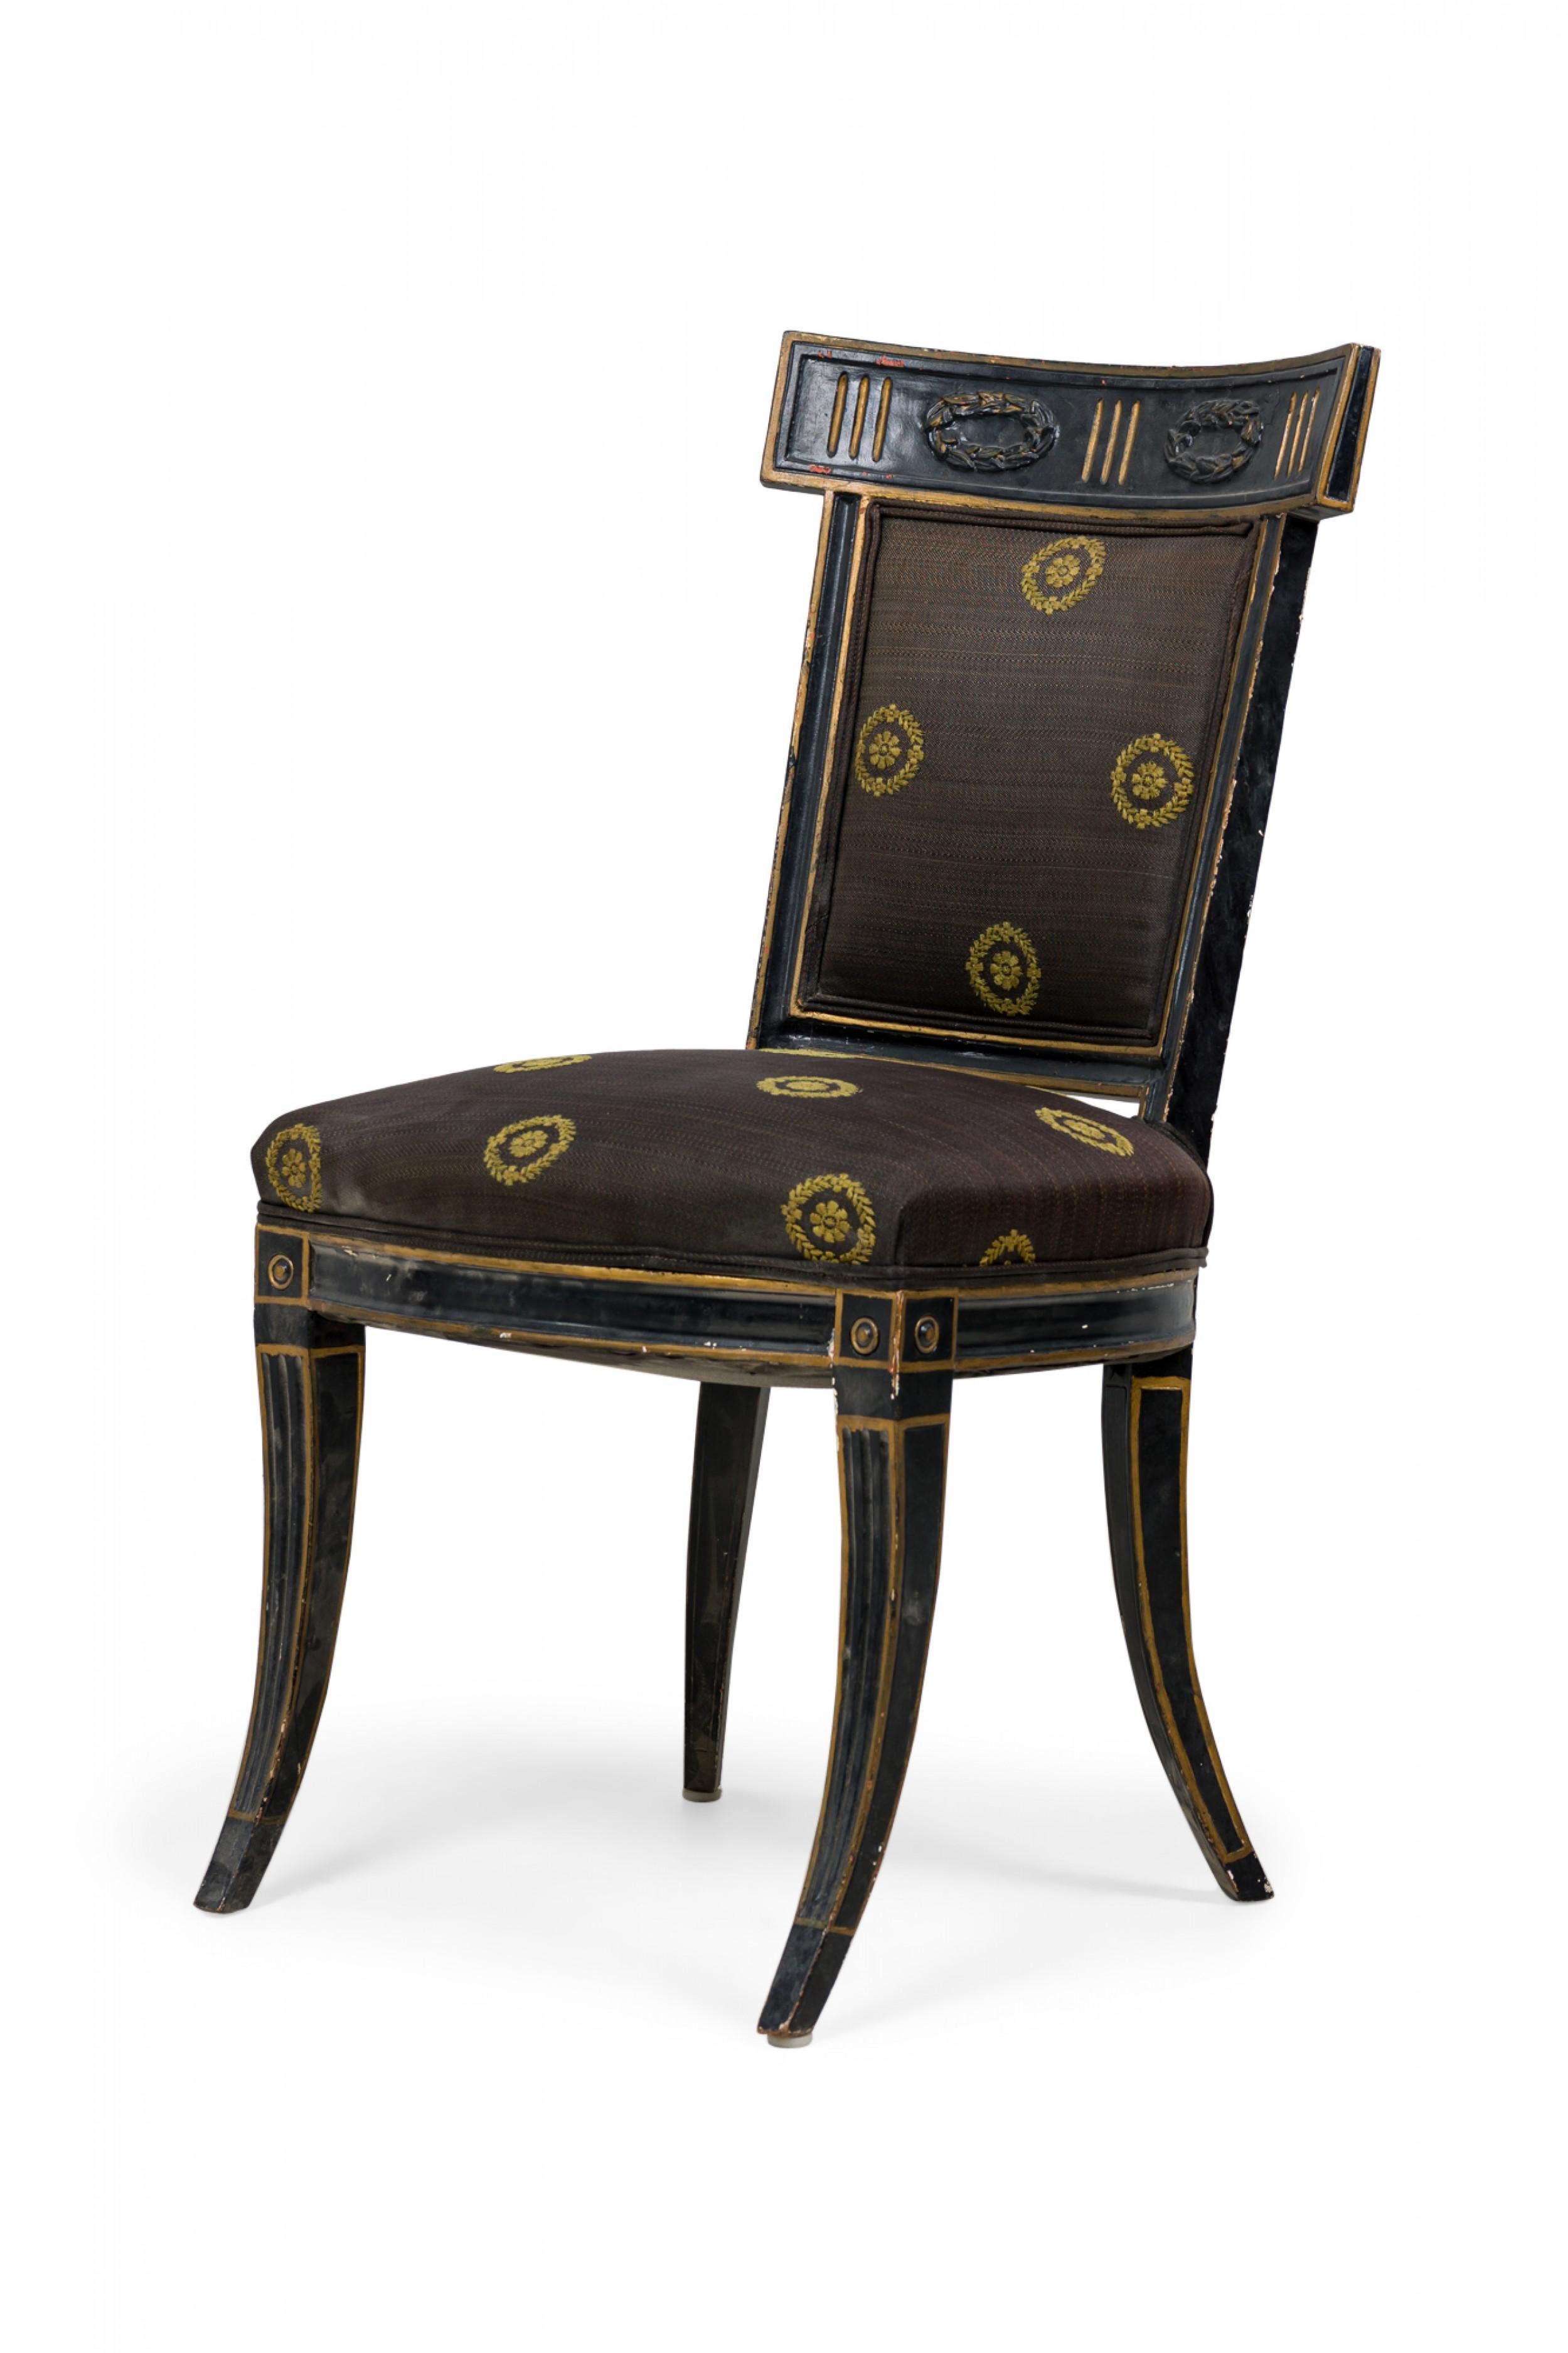 Embroidered Pair of Italian Neo-Classic Black Painted and Gilt Upholstered Dining Side Chair For Sale